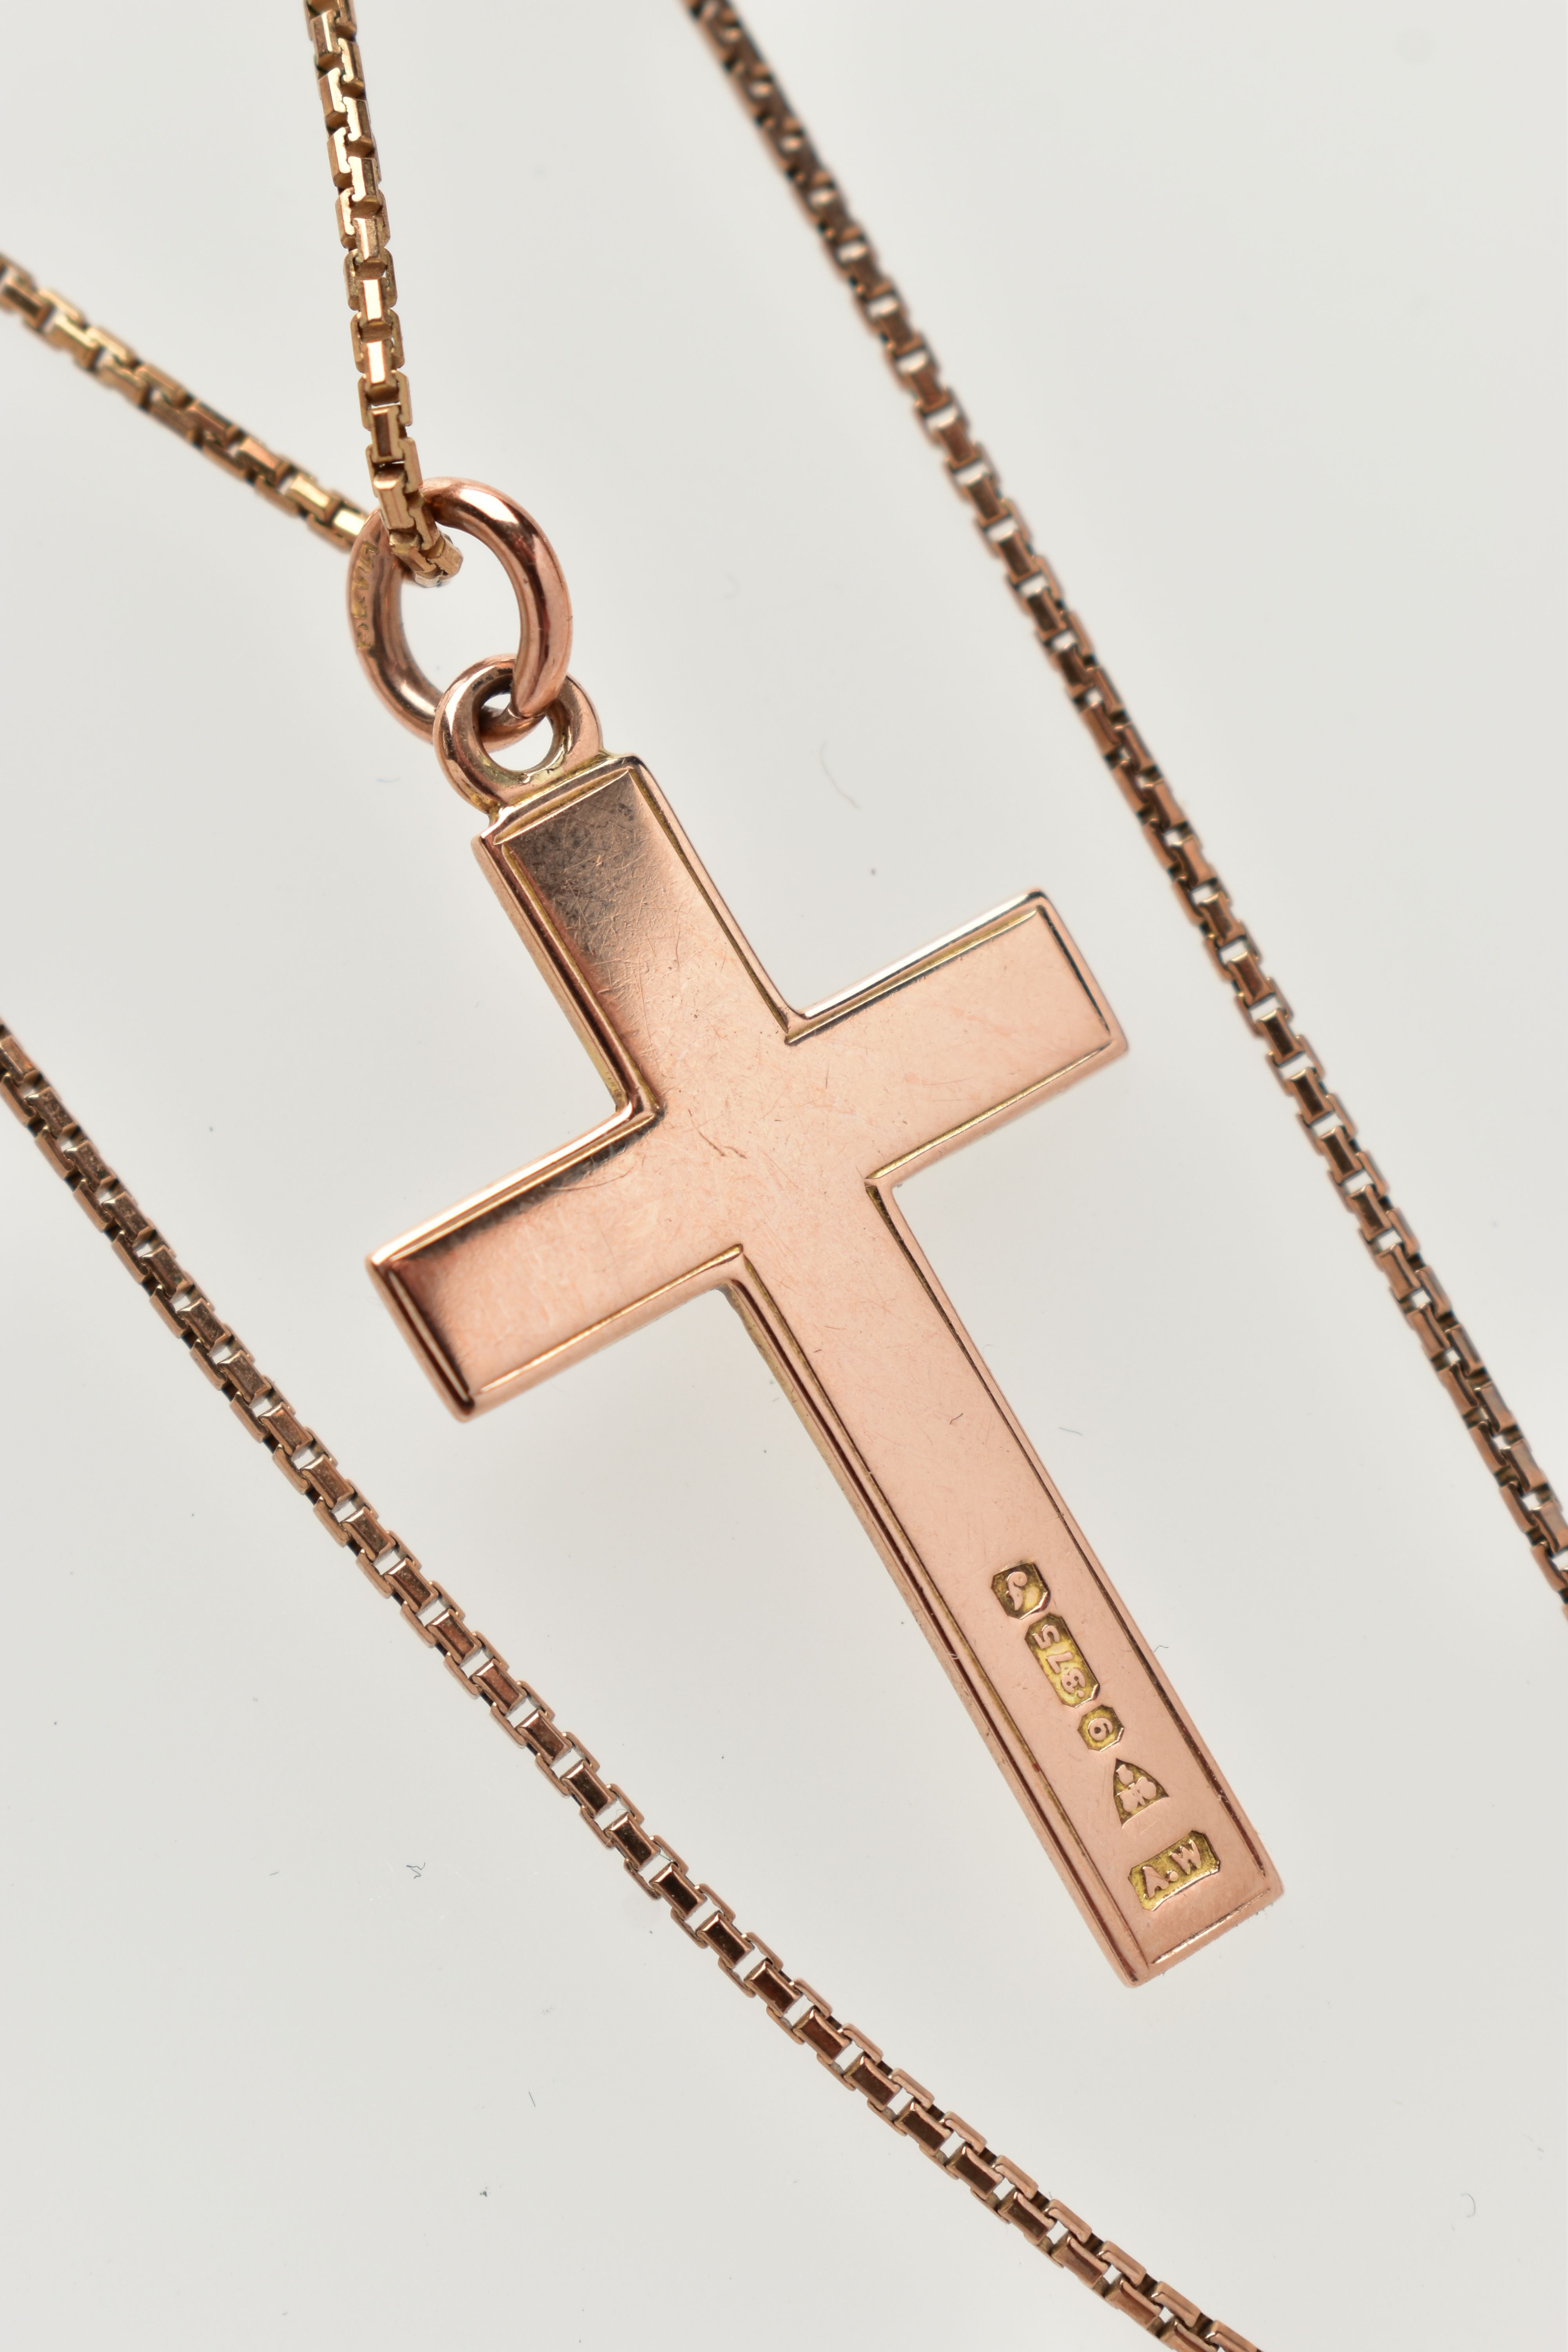 A 9CT GOLD PENDANT AND CHAIN, a rose gold cross pendant with floral and foliage engraved detail, - Image 3 of 3